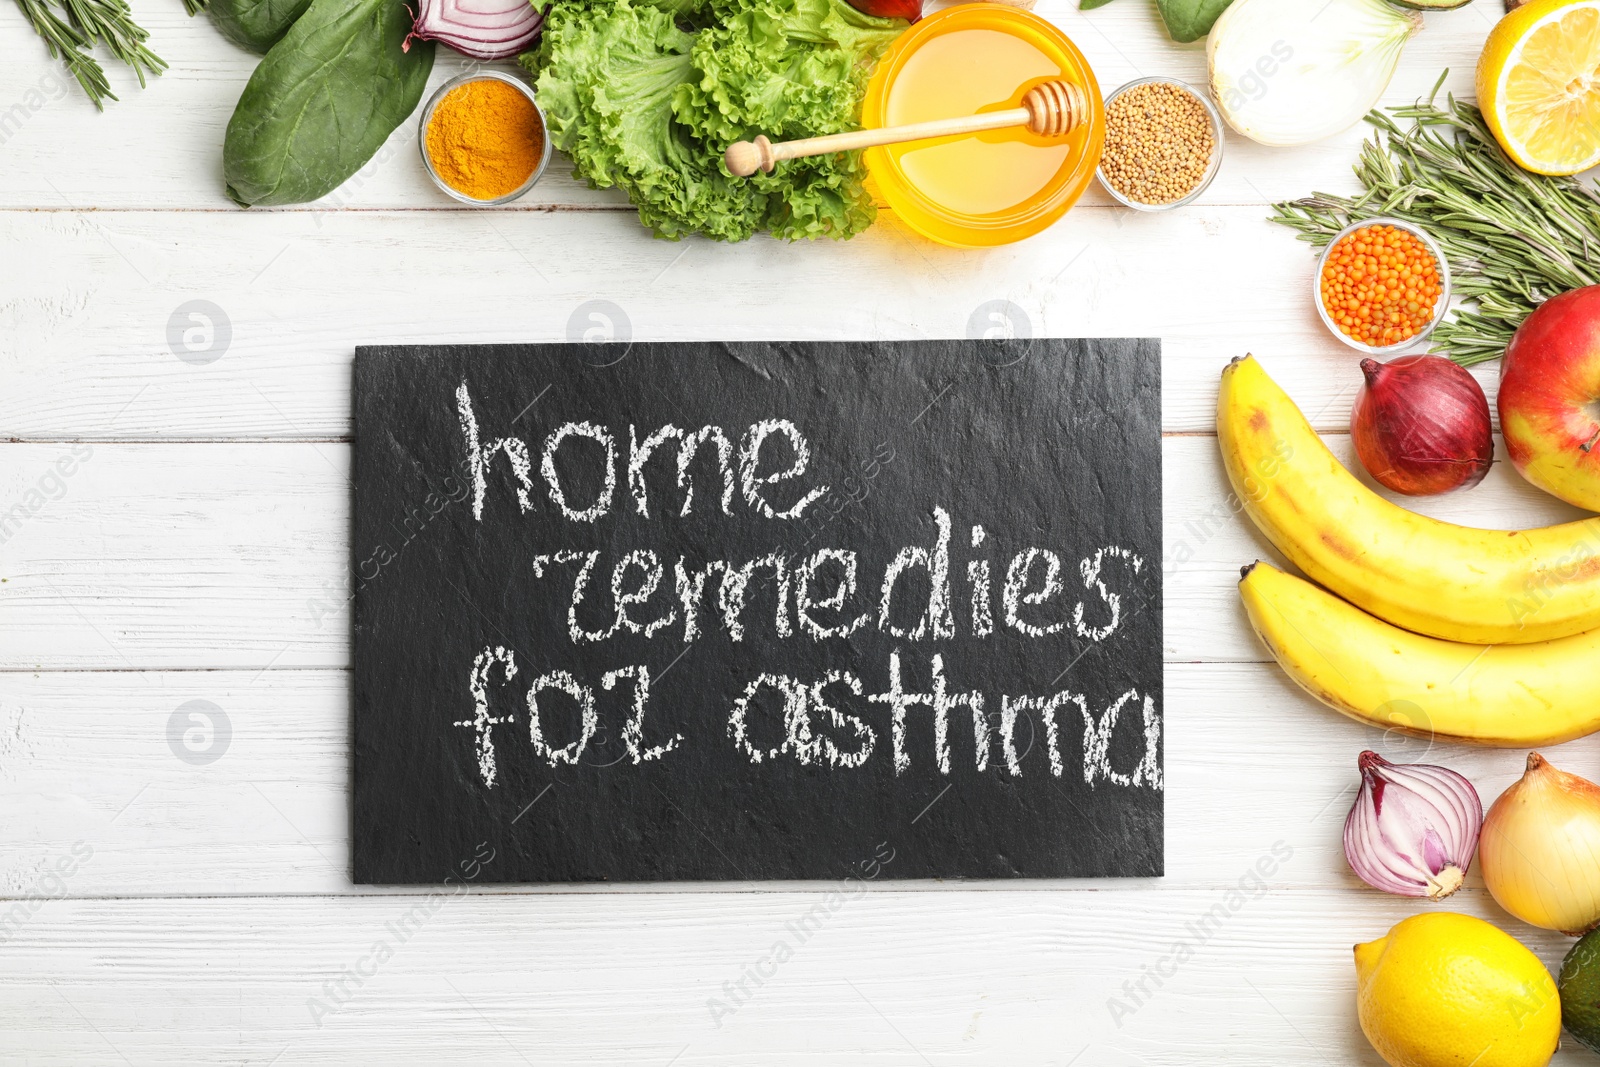 Photo of Natural products and slate board with text HOME REMEDIES FOR ASTHMA on wooden background, flat lay